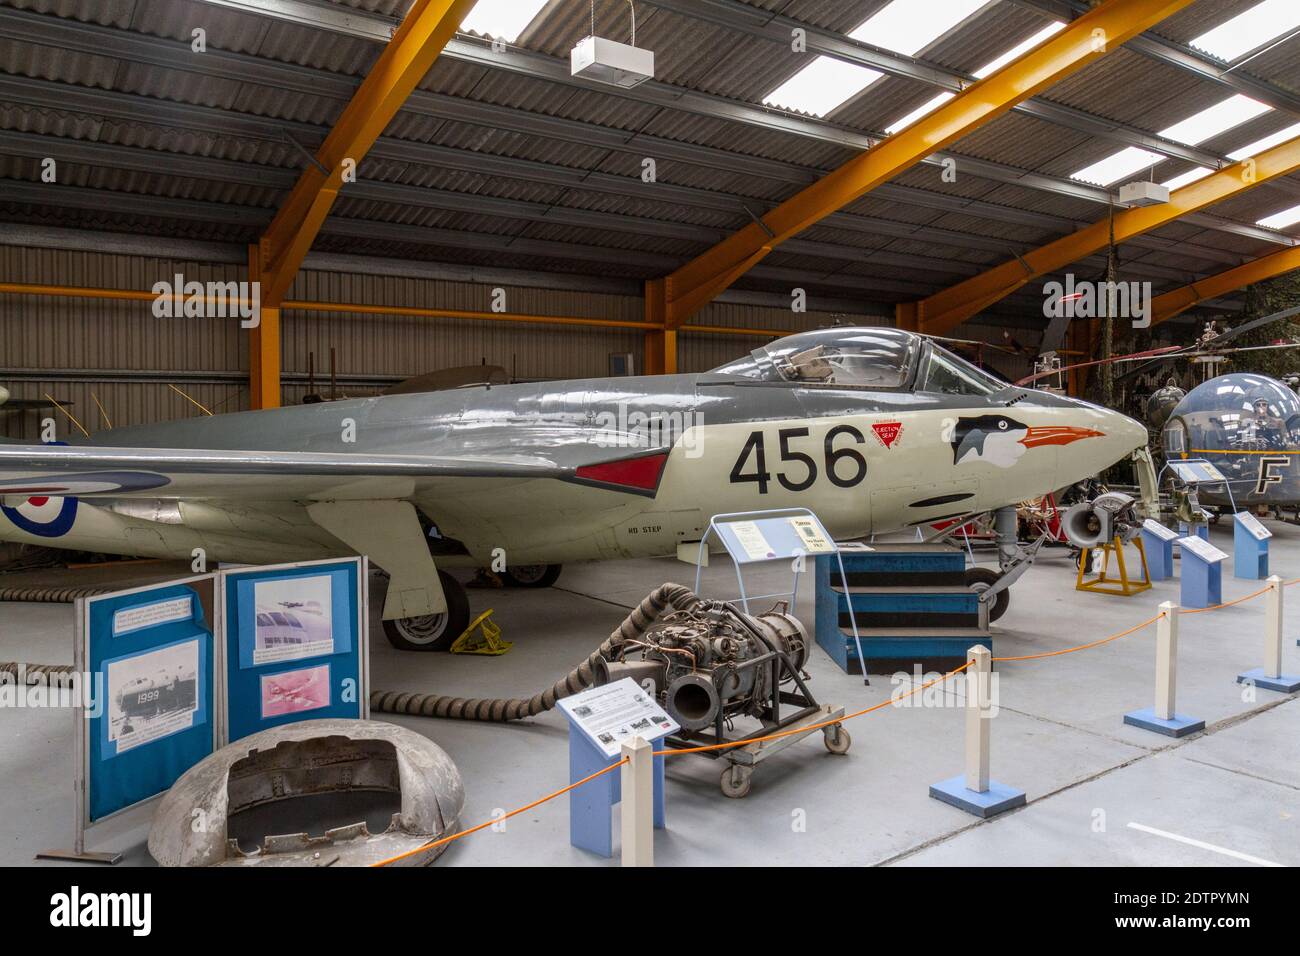 An Armstrong-Whitworth Sea Hawk FB.3 (WM913) strike fighter, a British single-seat jet fighter, Newark Air Museum, Newark-on-Trent, Notts, UK. Stock Photo